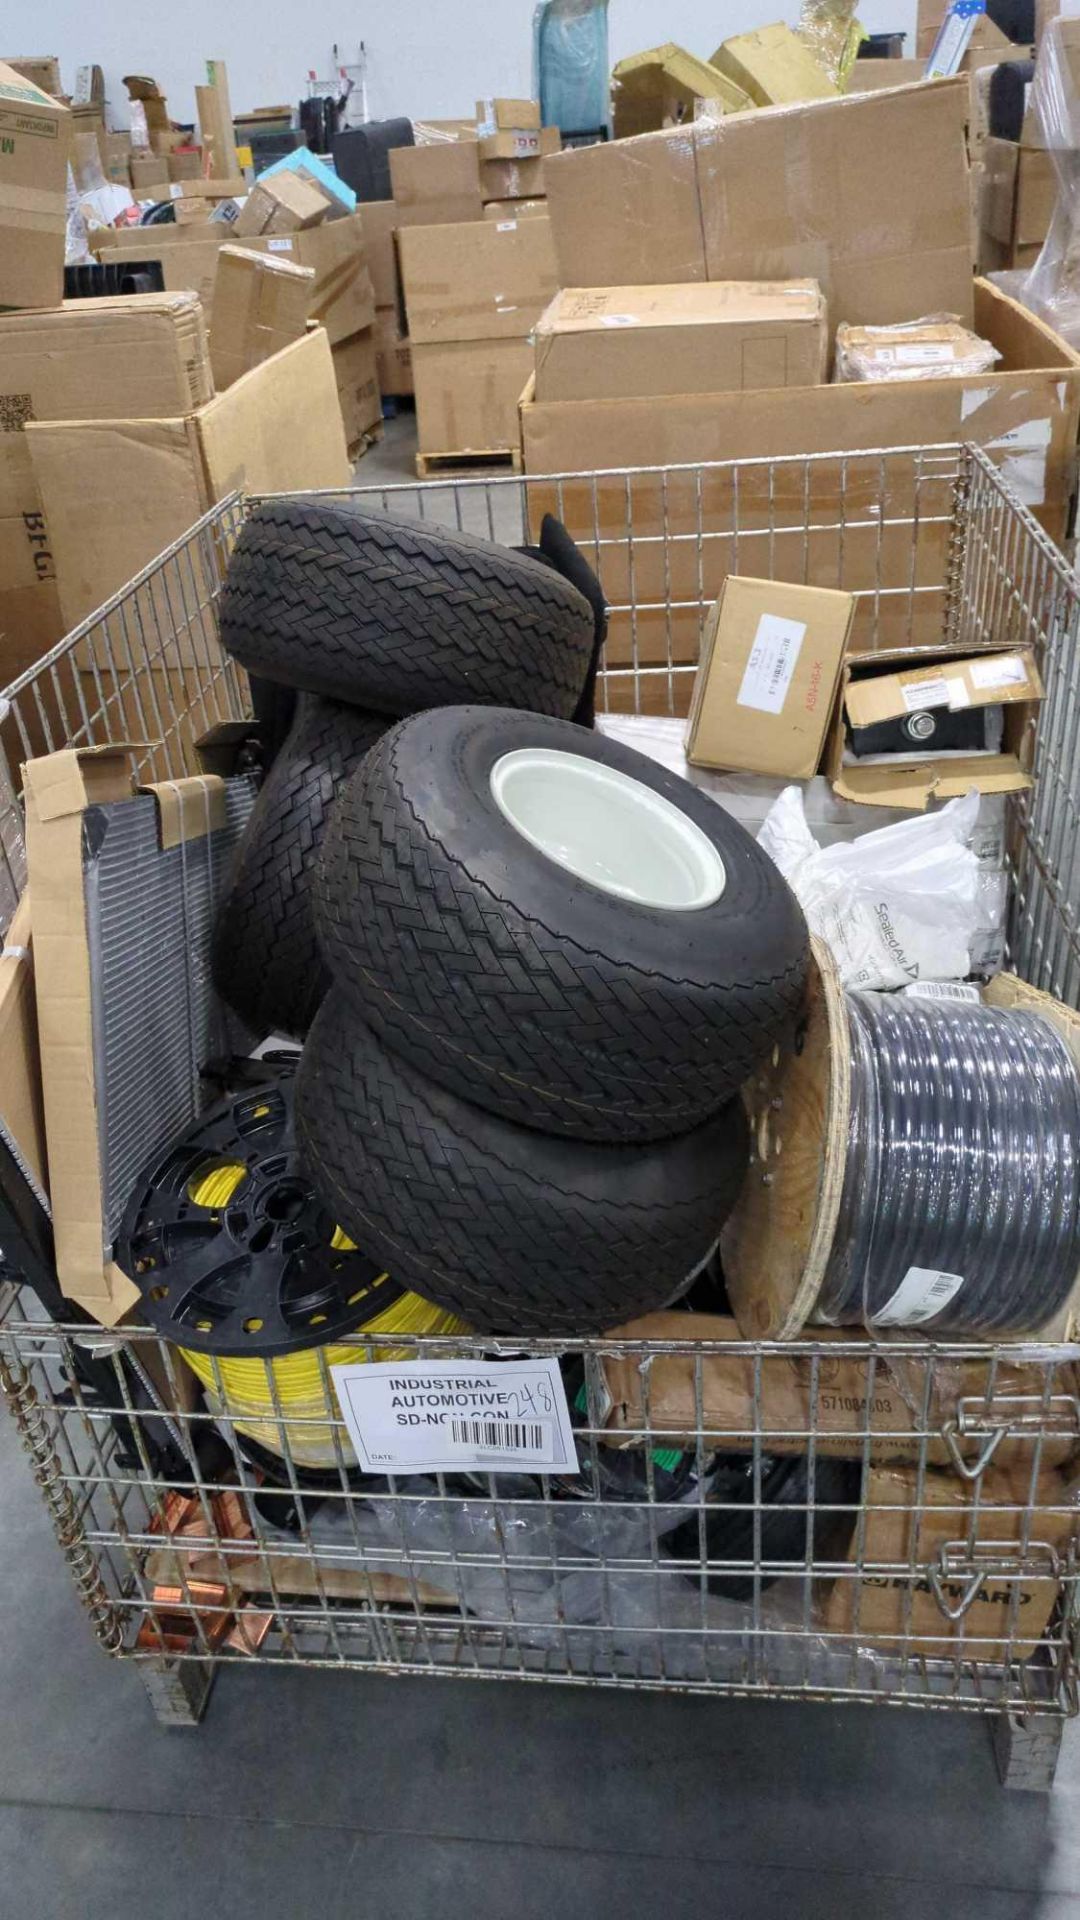 Wire bin- Tires, romex wire, Hayward, Car parts, radiators and more